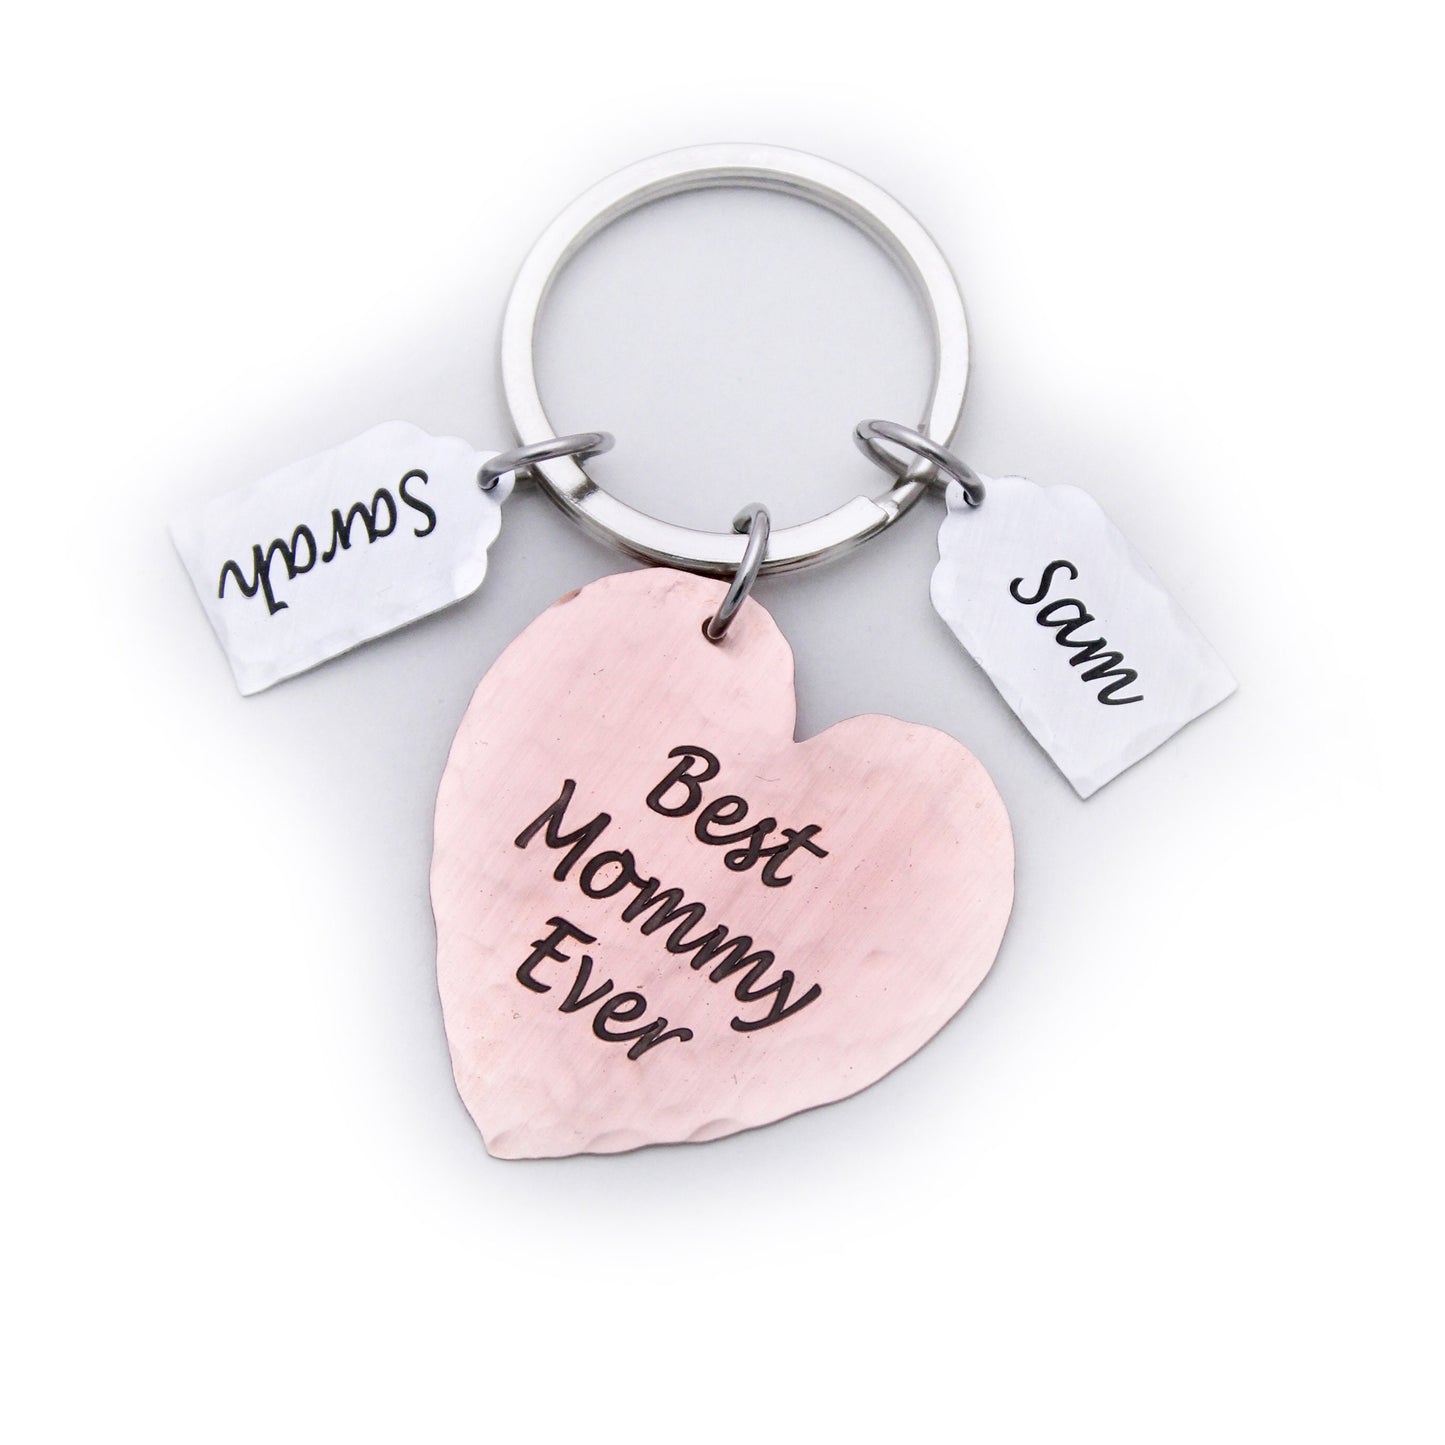 Best Mommy Ever Keychain, Custom Key Chain, Mommy Keychain, Gift for Her, Mother's Day Gift, Personalized Gift, Keychain Purse Charm for Mom